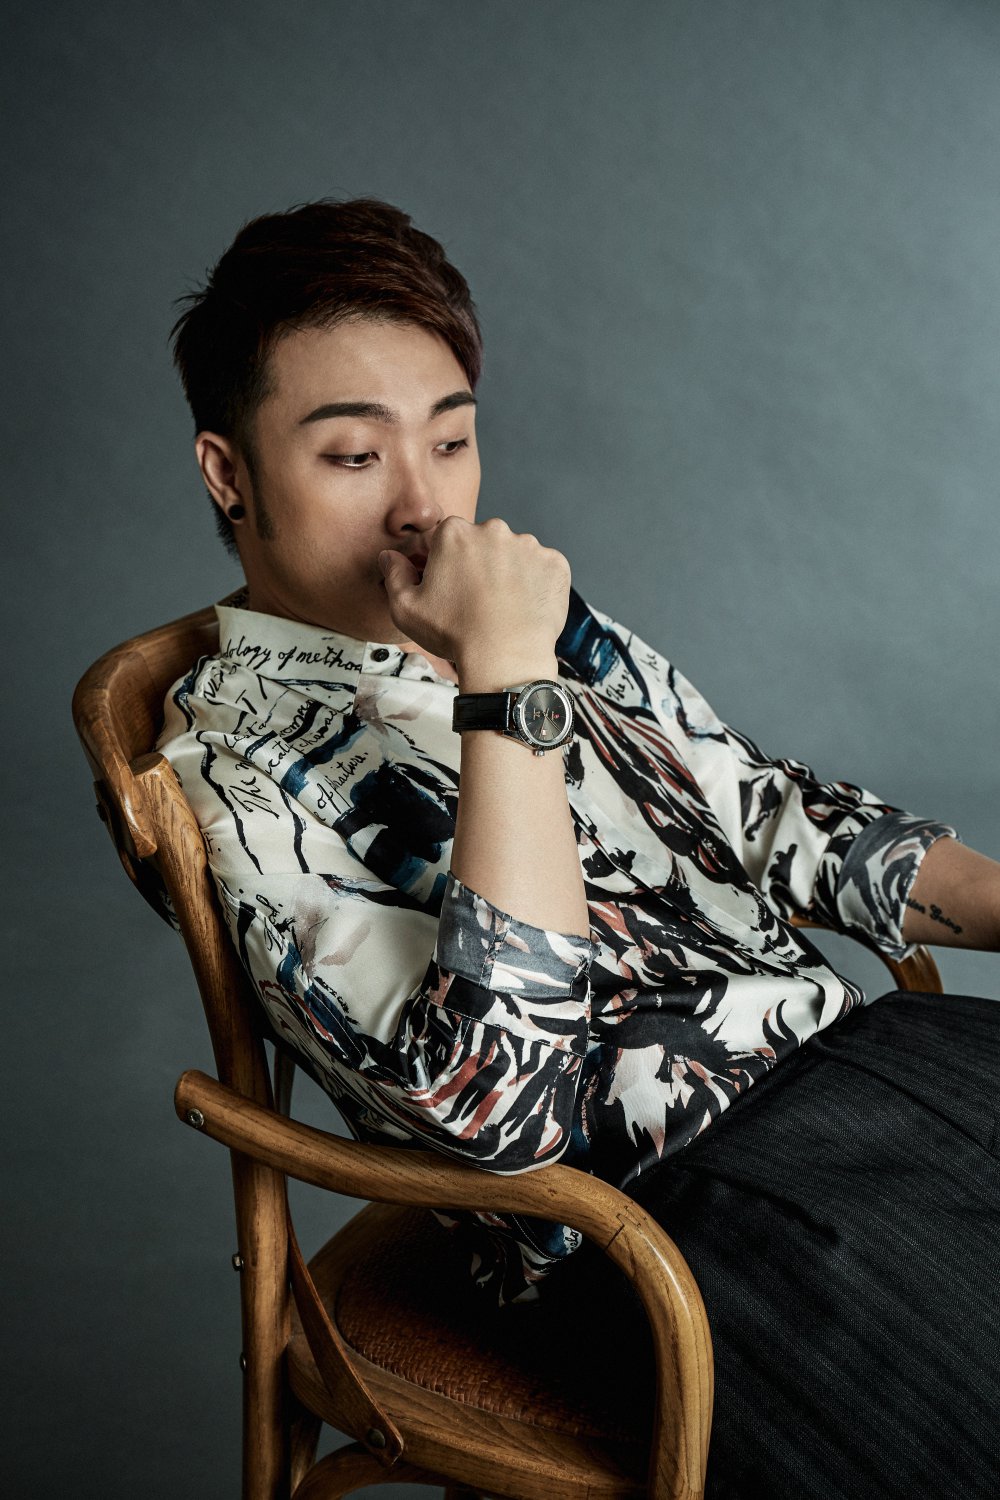 kingssleeve interview Shaun Liew founder yellow brick road dior homme - Shaun Liew: Success from Dedication and Passion